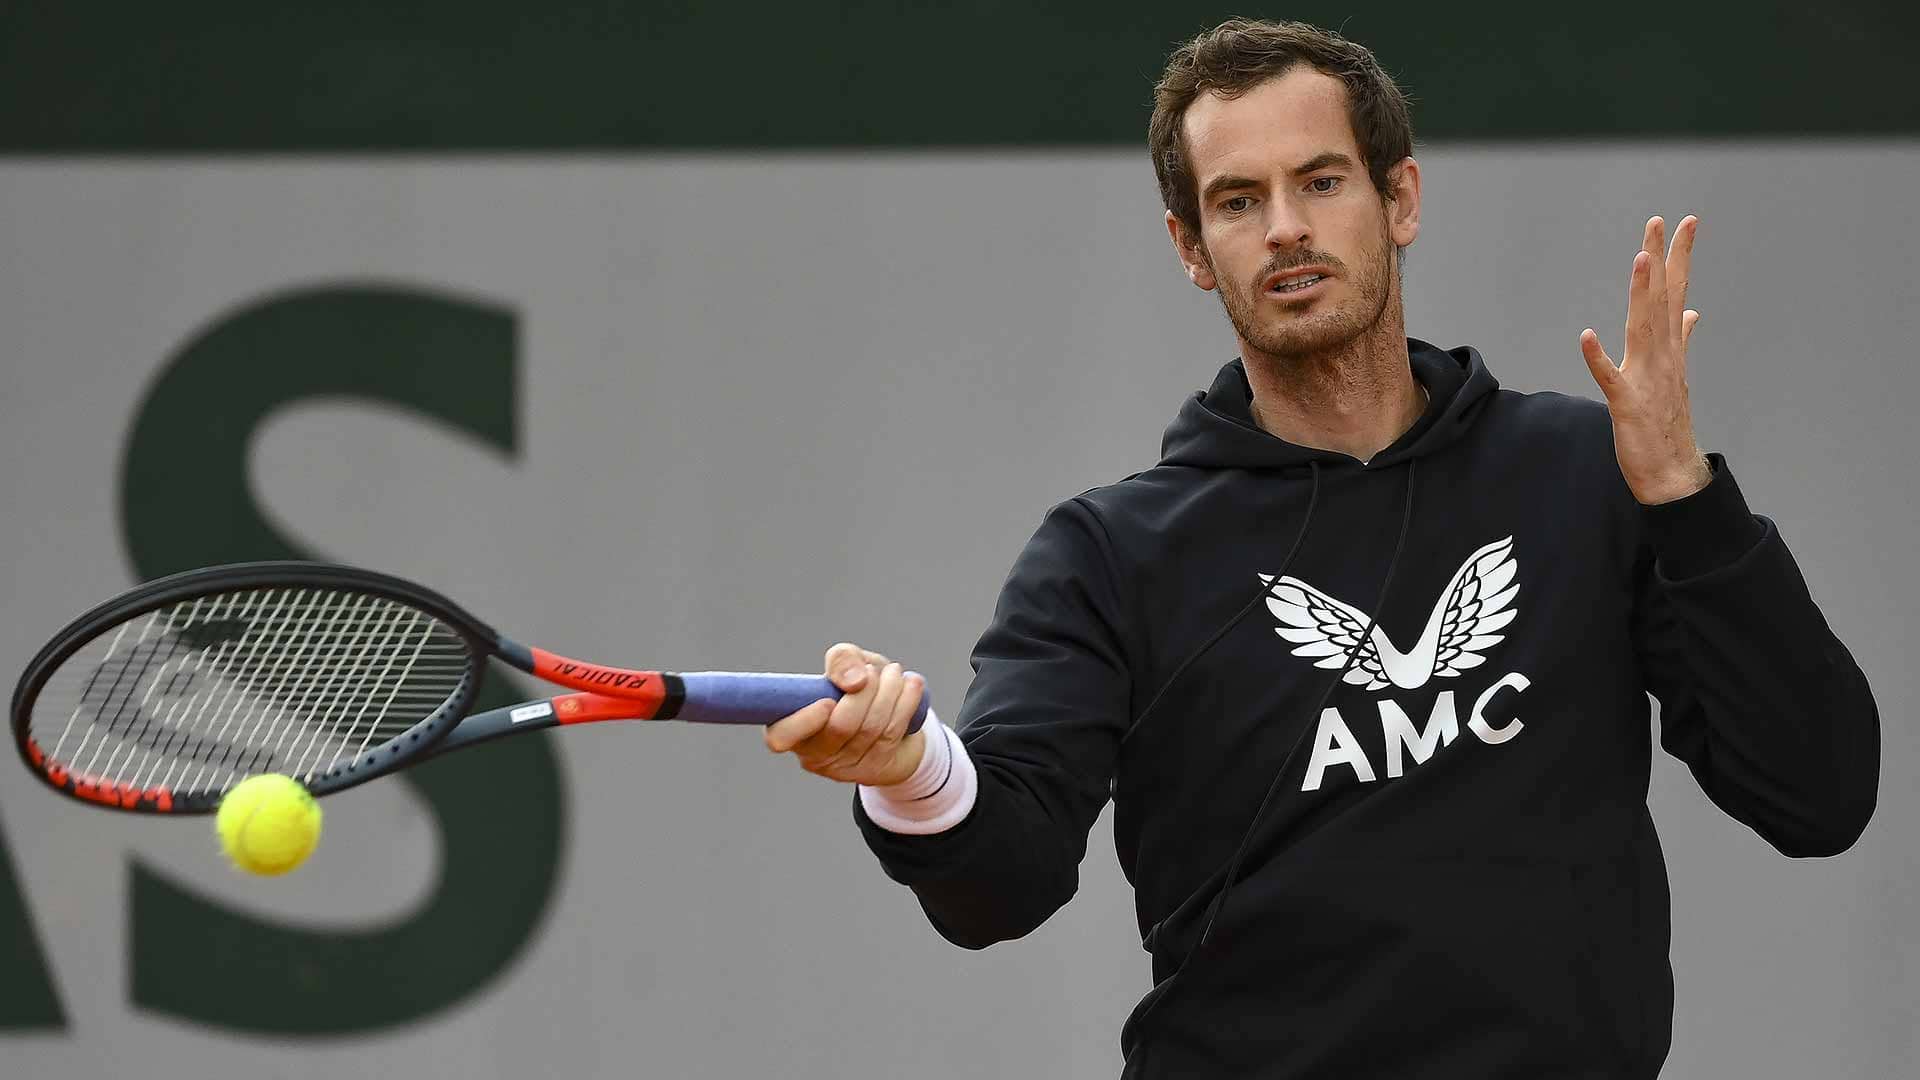 Andy Murray will compete at back-to-back ATP 250 tournaments in Cologne, Germany.